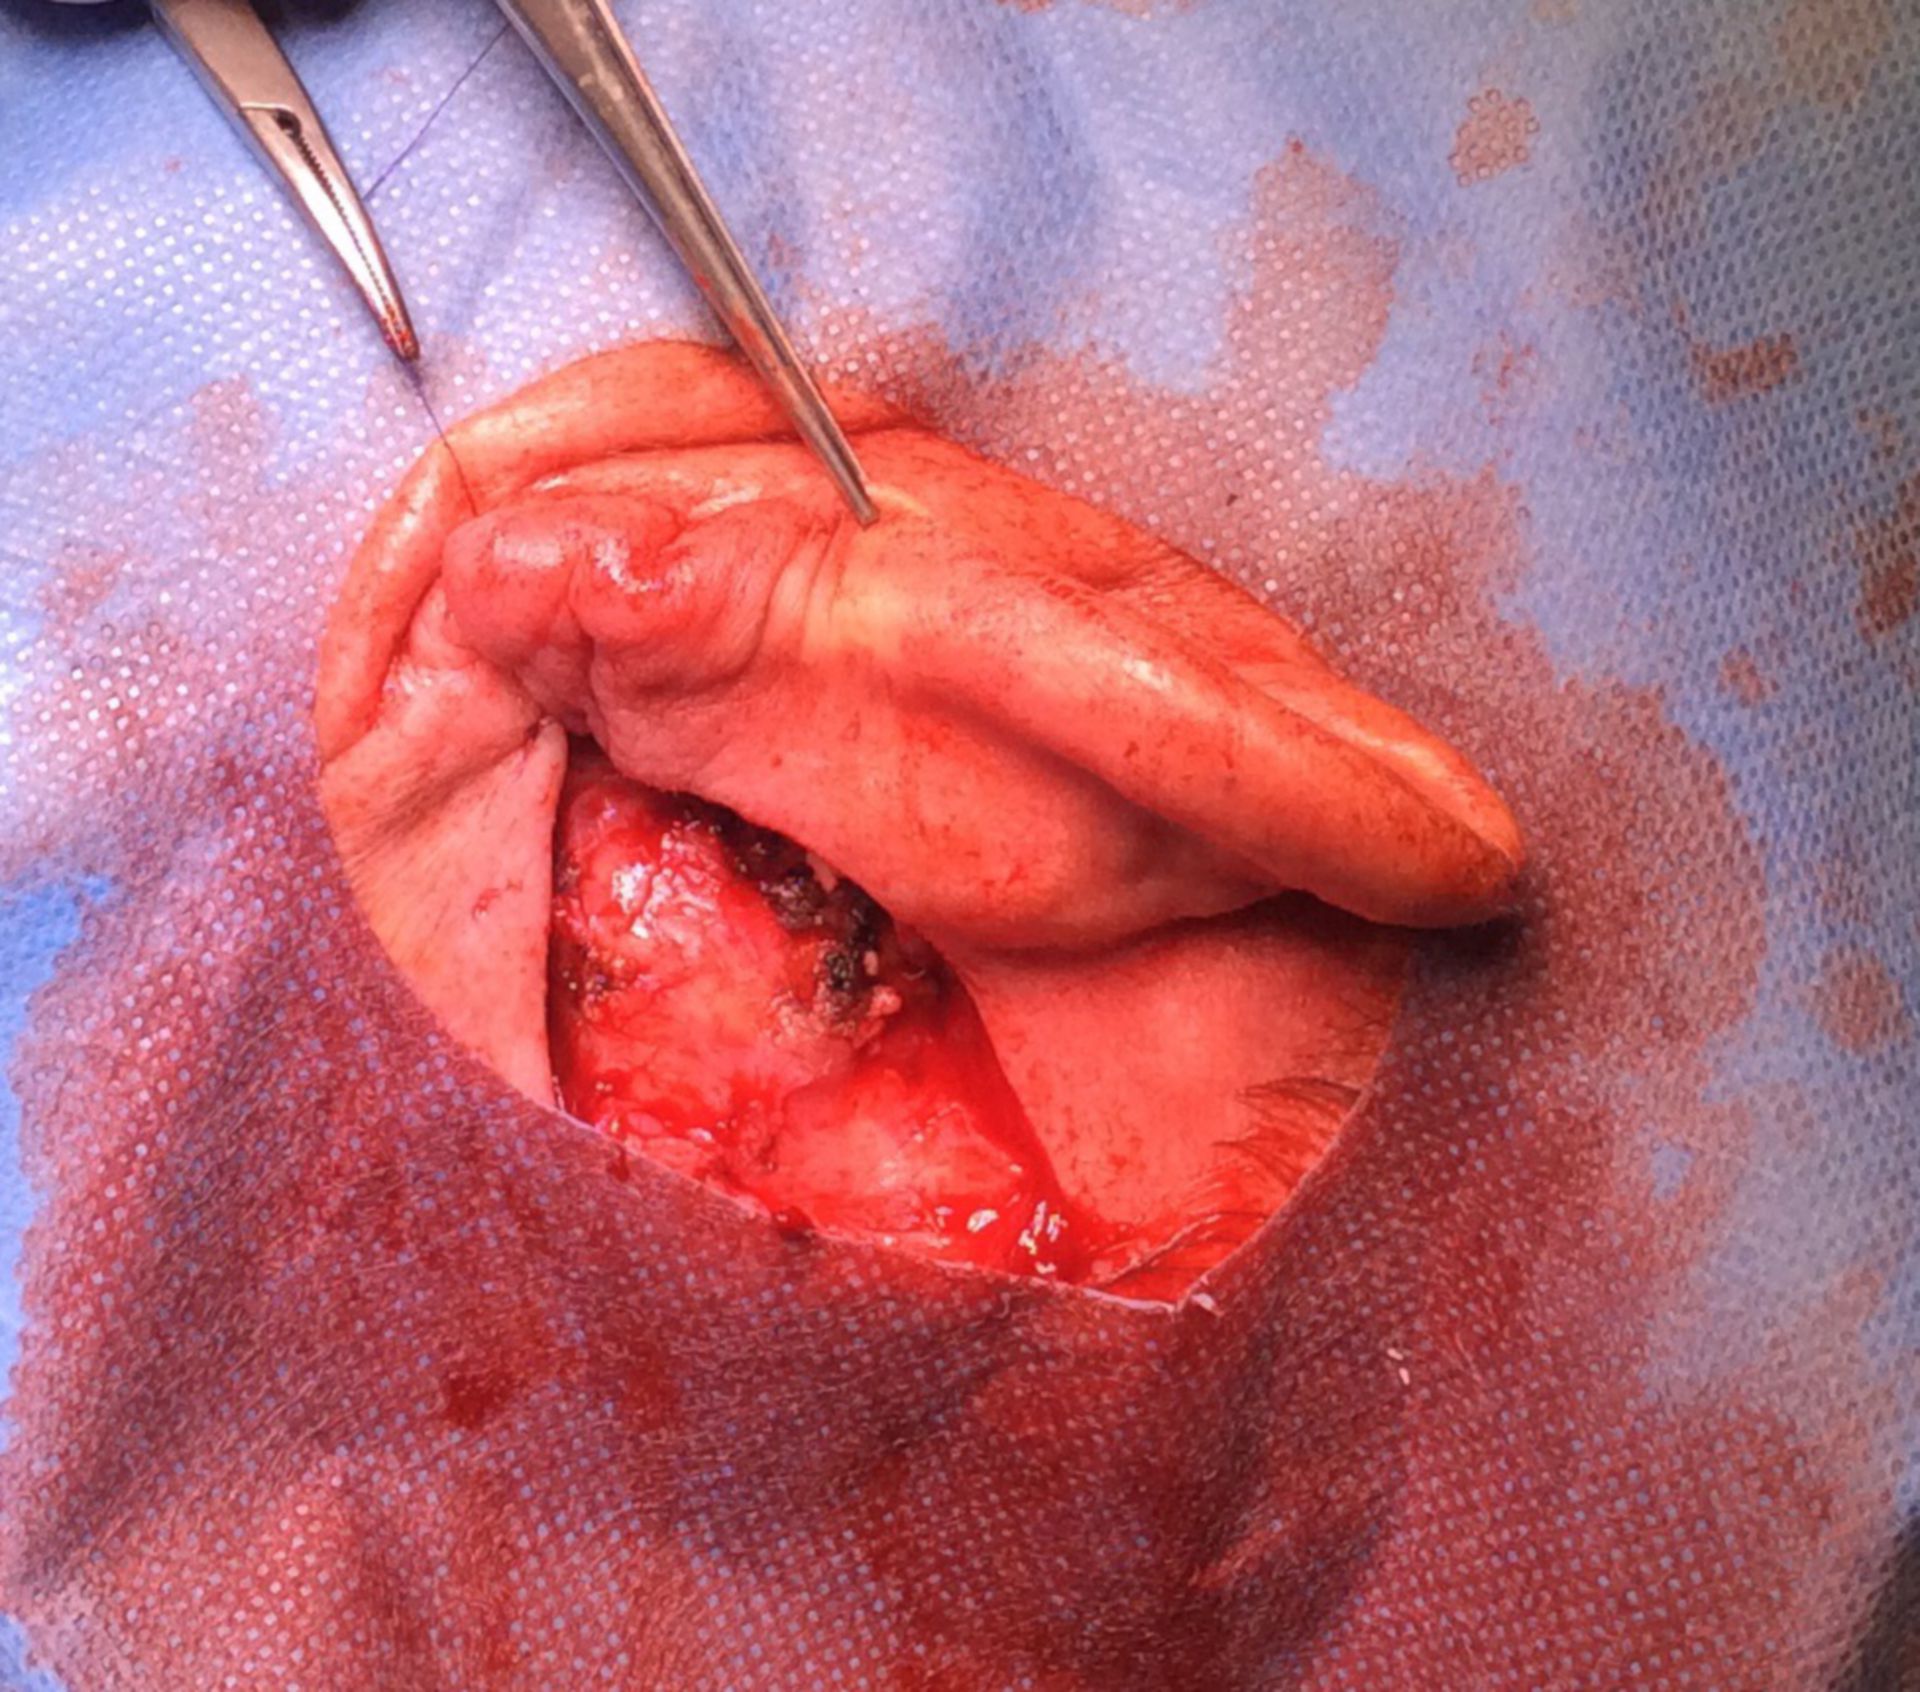 Retroauricular basal-cell carcinoma: intraoperative site